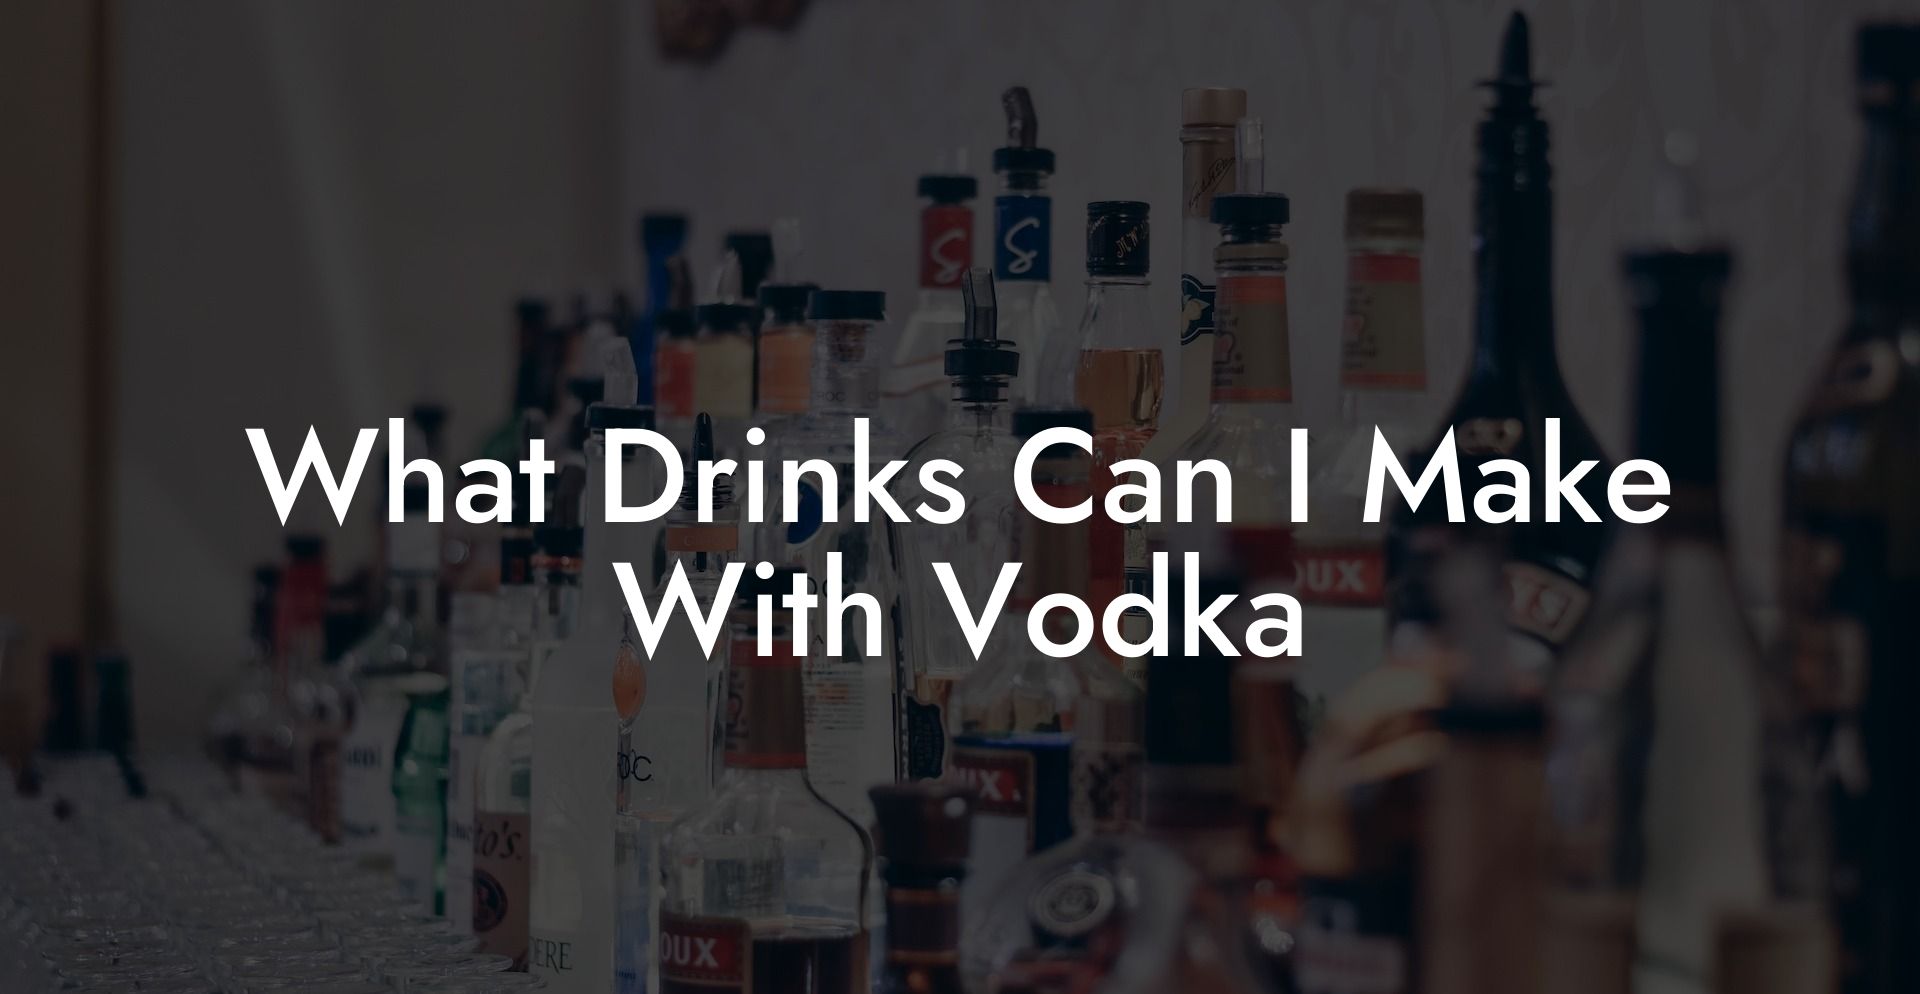 What Drinks Can I Make With Vodka